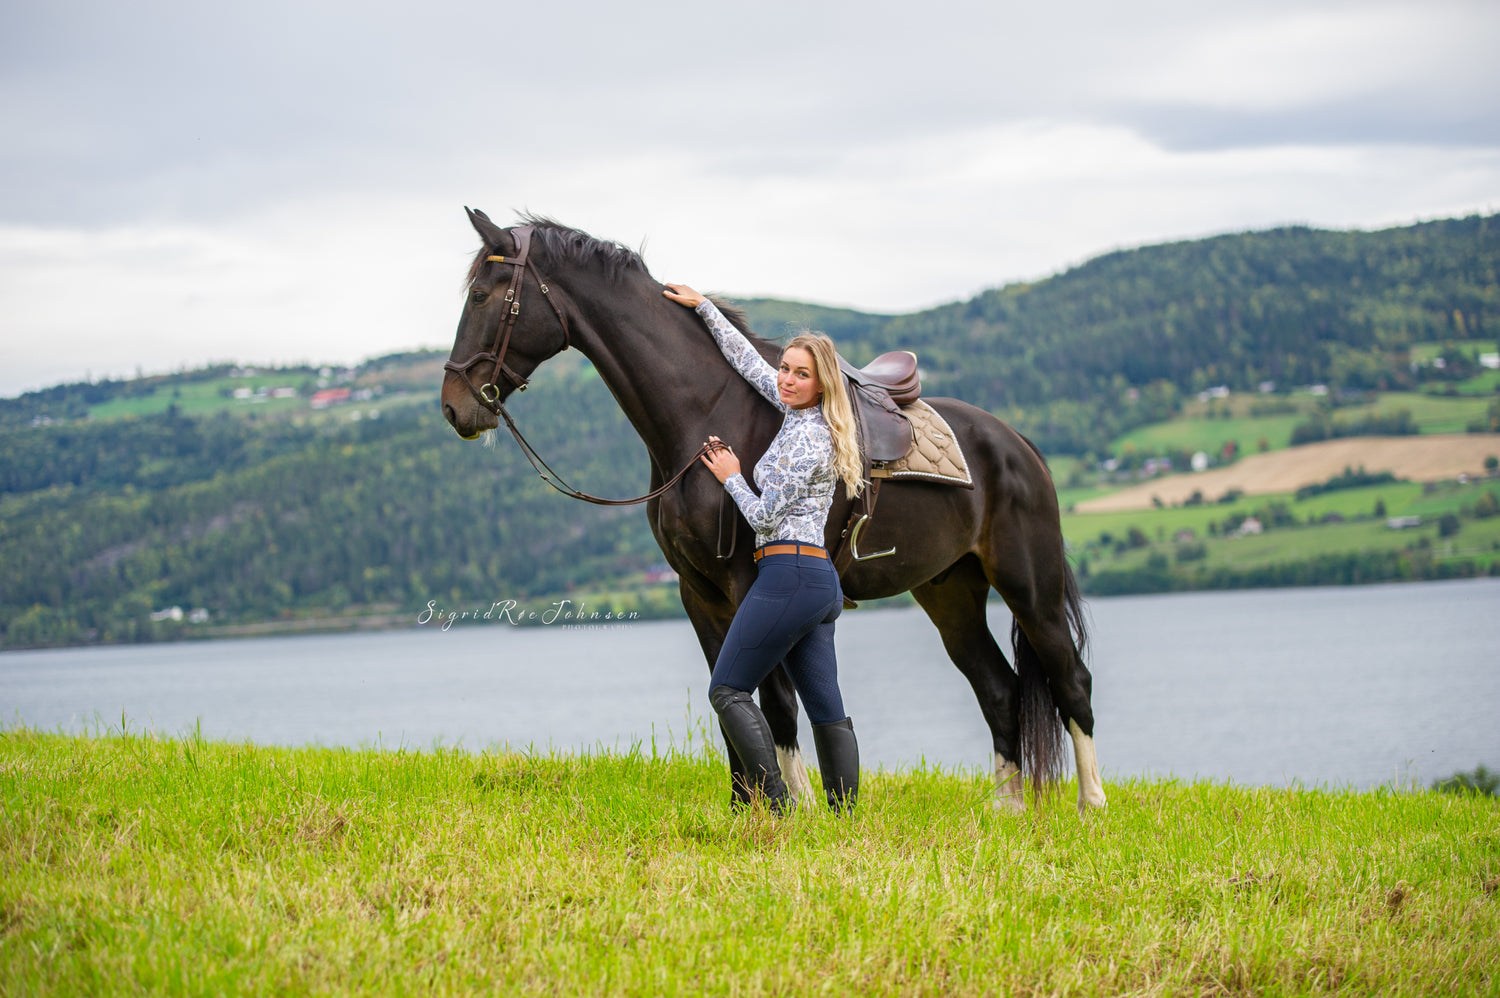 A New Zealand Equestrian Brand with Global Appeal